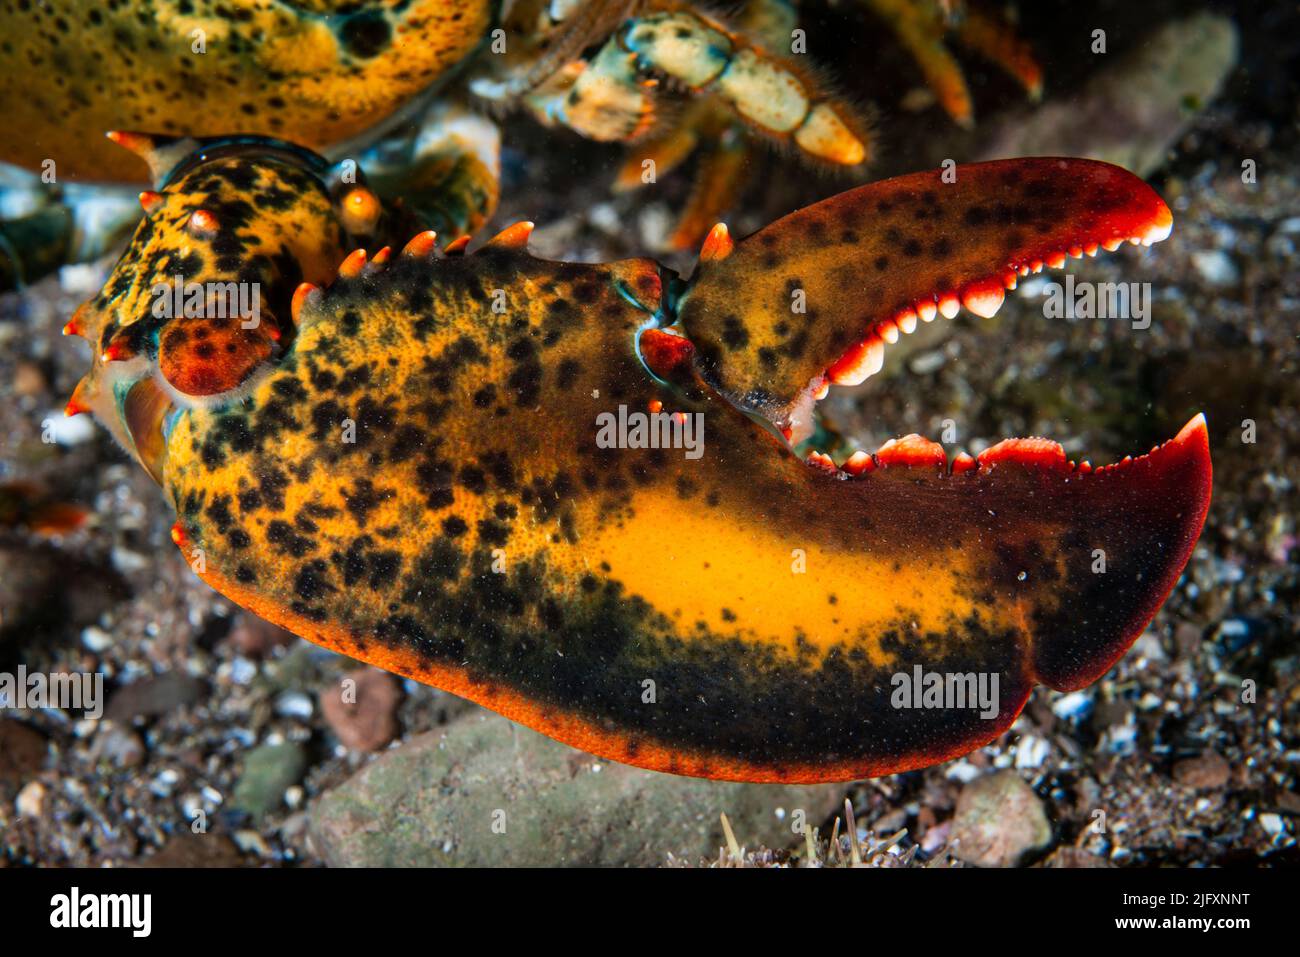 Close up of an American lobster's claw underwater in the Gulf of St. Lawrence. Stock Photo